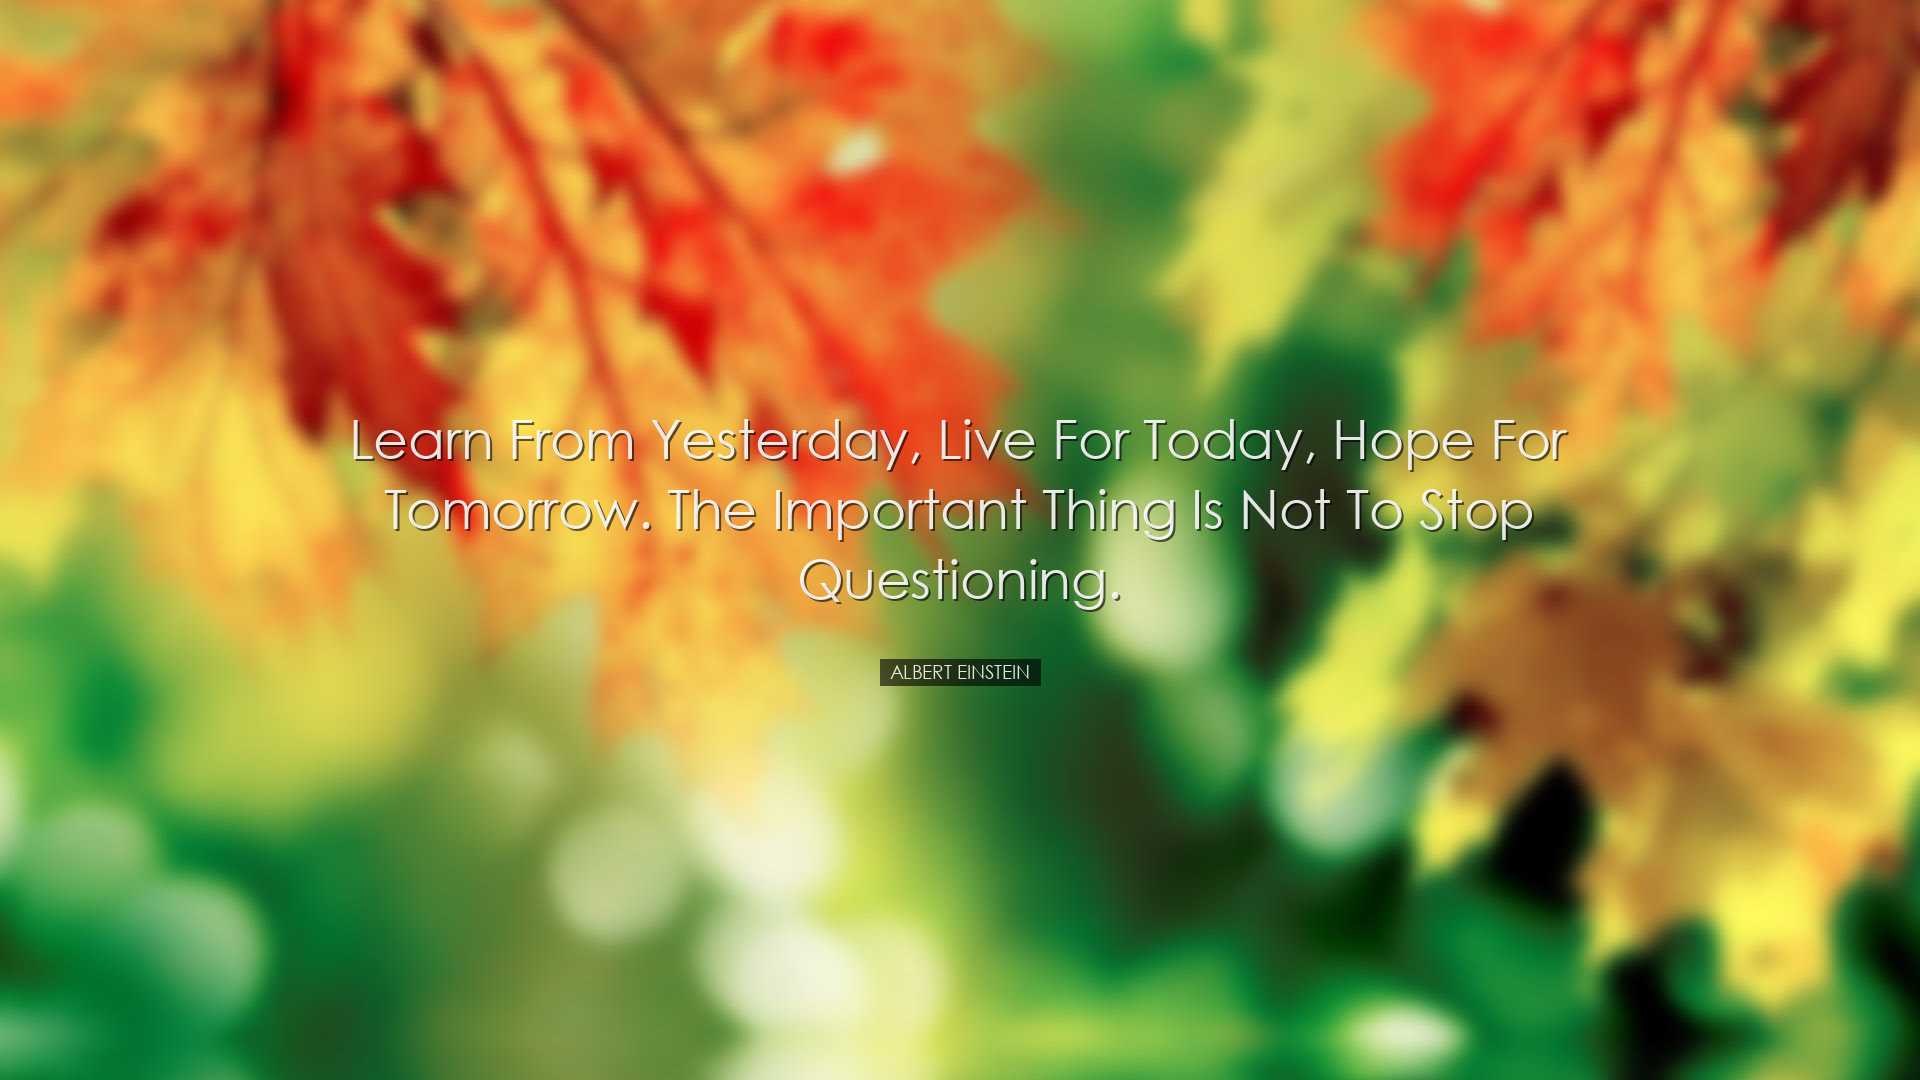 Learn from yesterday, live for today, hope for tomorrow. The impor